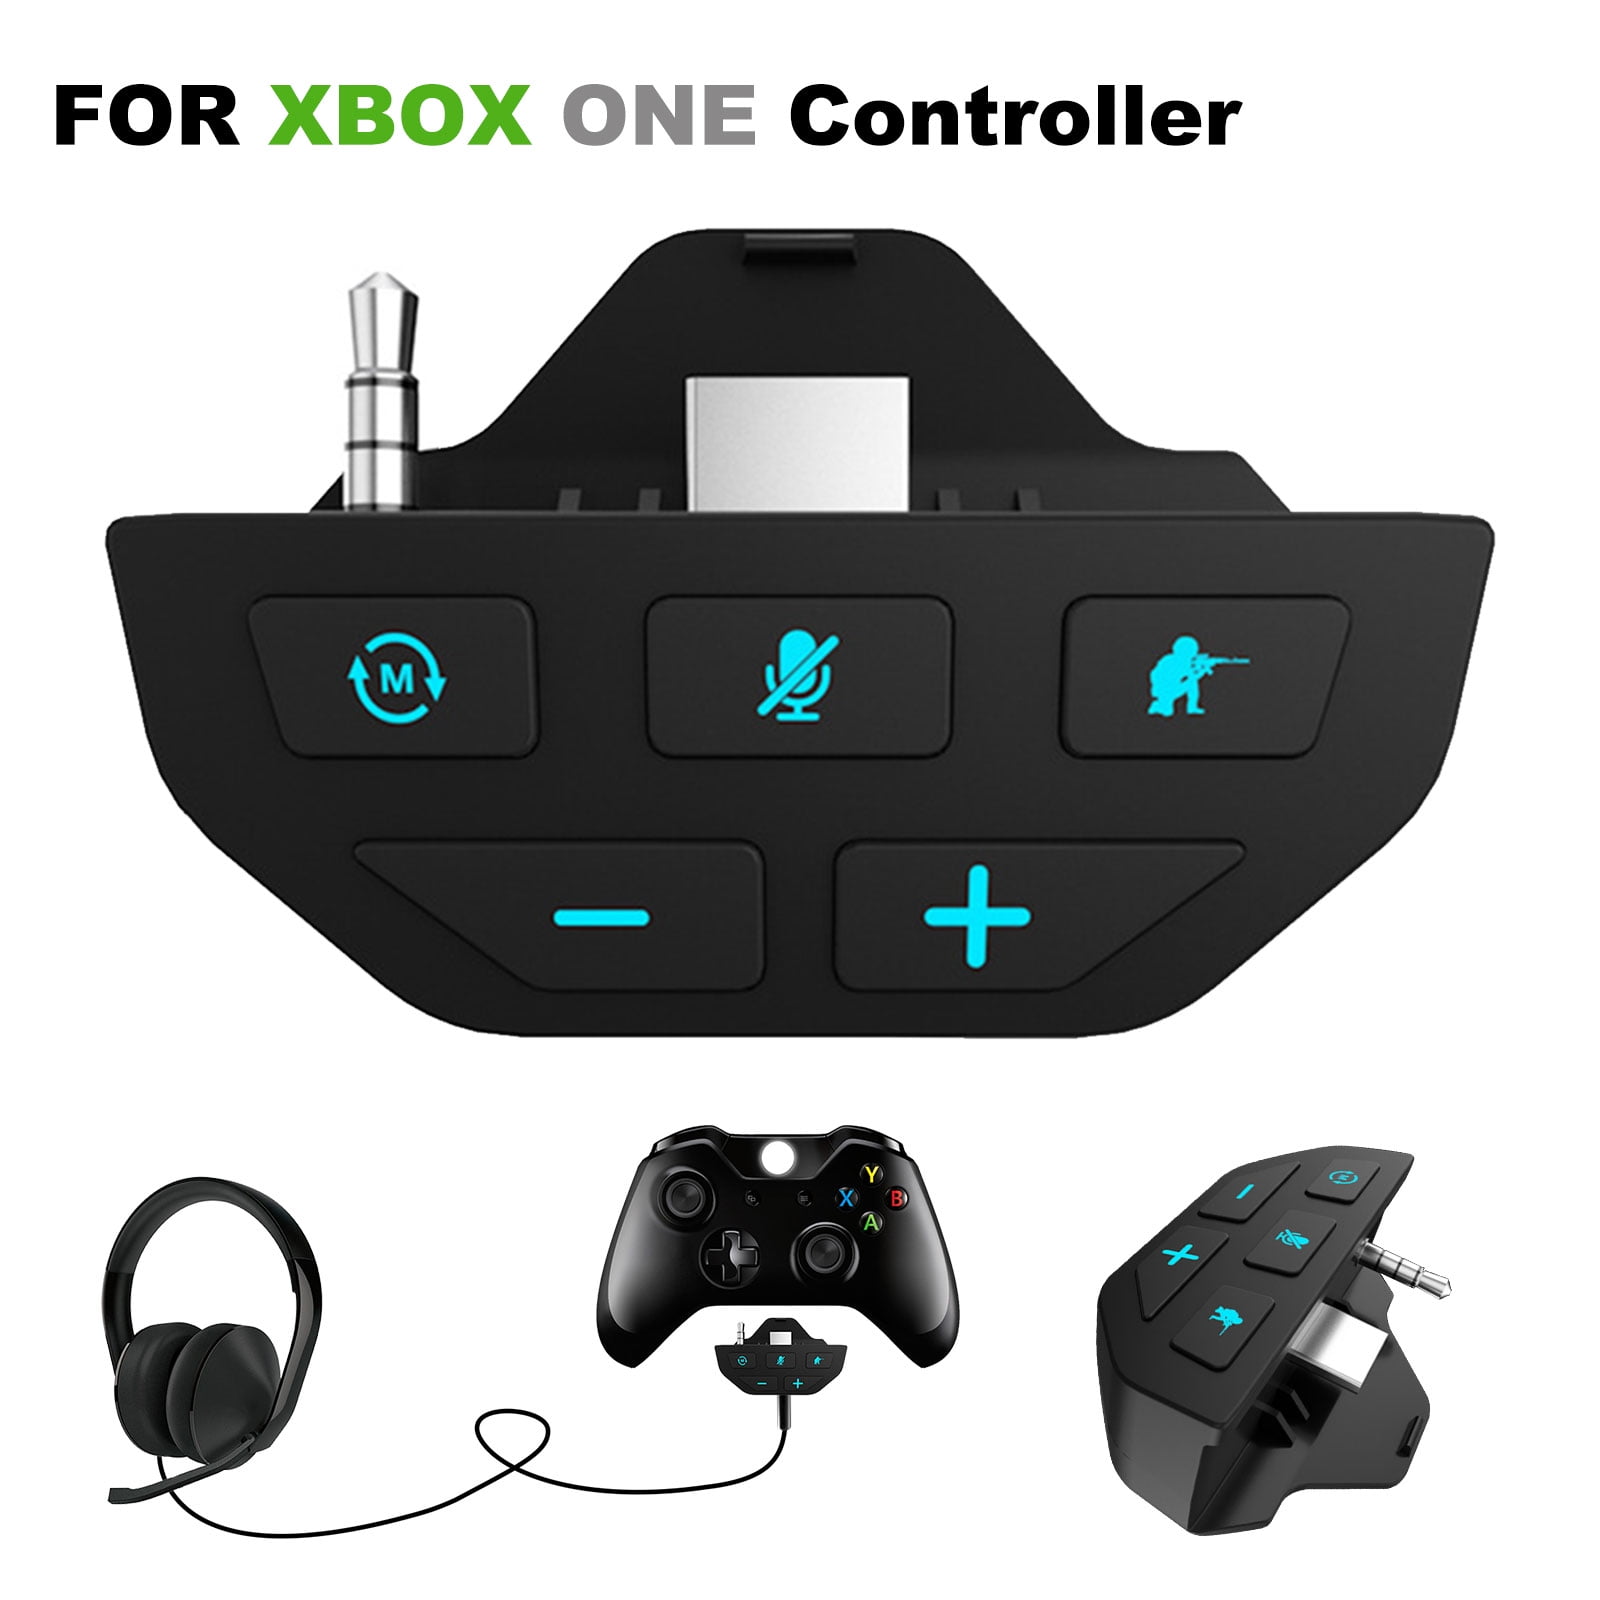 Stereo Headset Adapter For Xbox One Headset Audio Controller Converter Compatible With Xbox One Xbox One S X Controller With Usb Cable Audio Mic Headphone Converter For Xbox One Controller Walmart Com